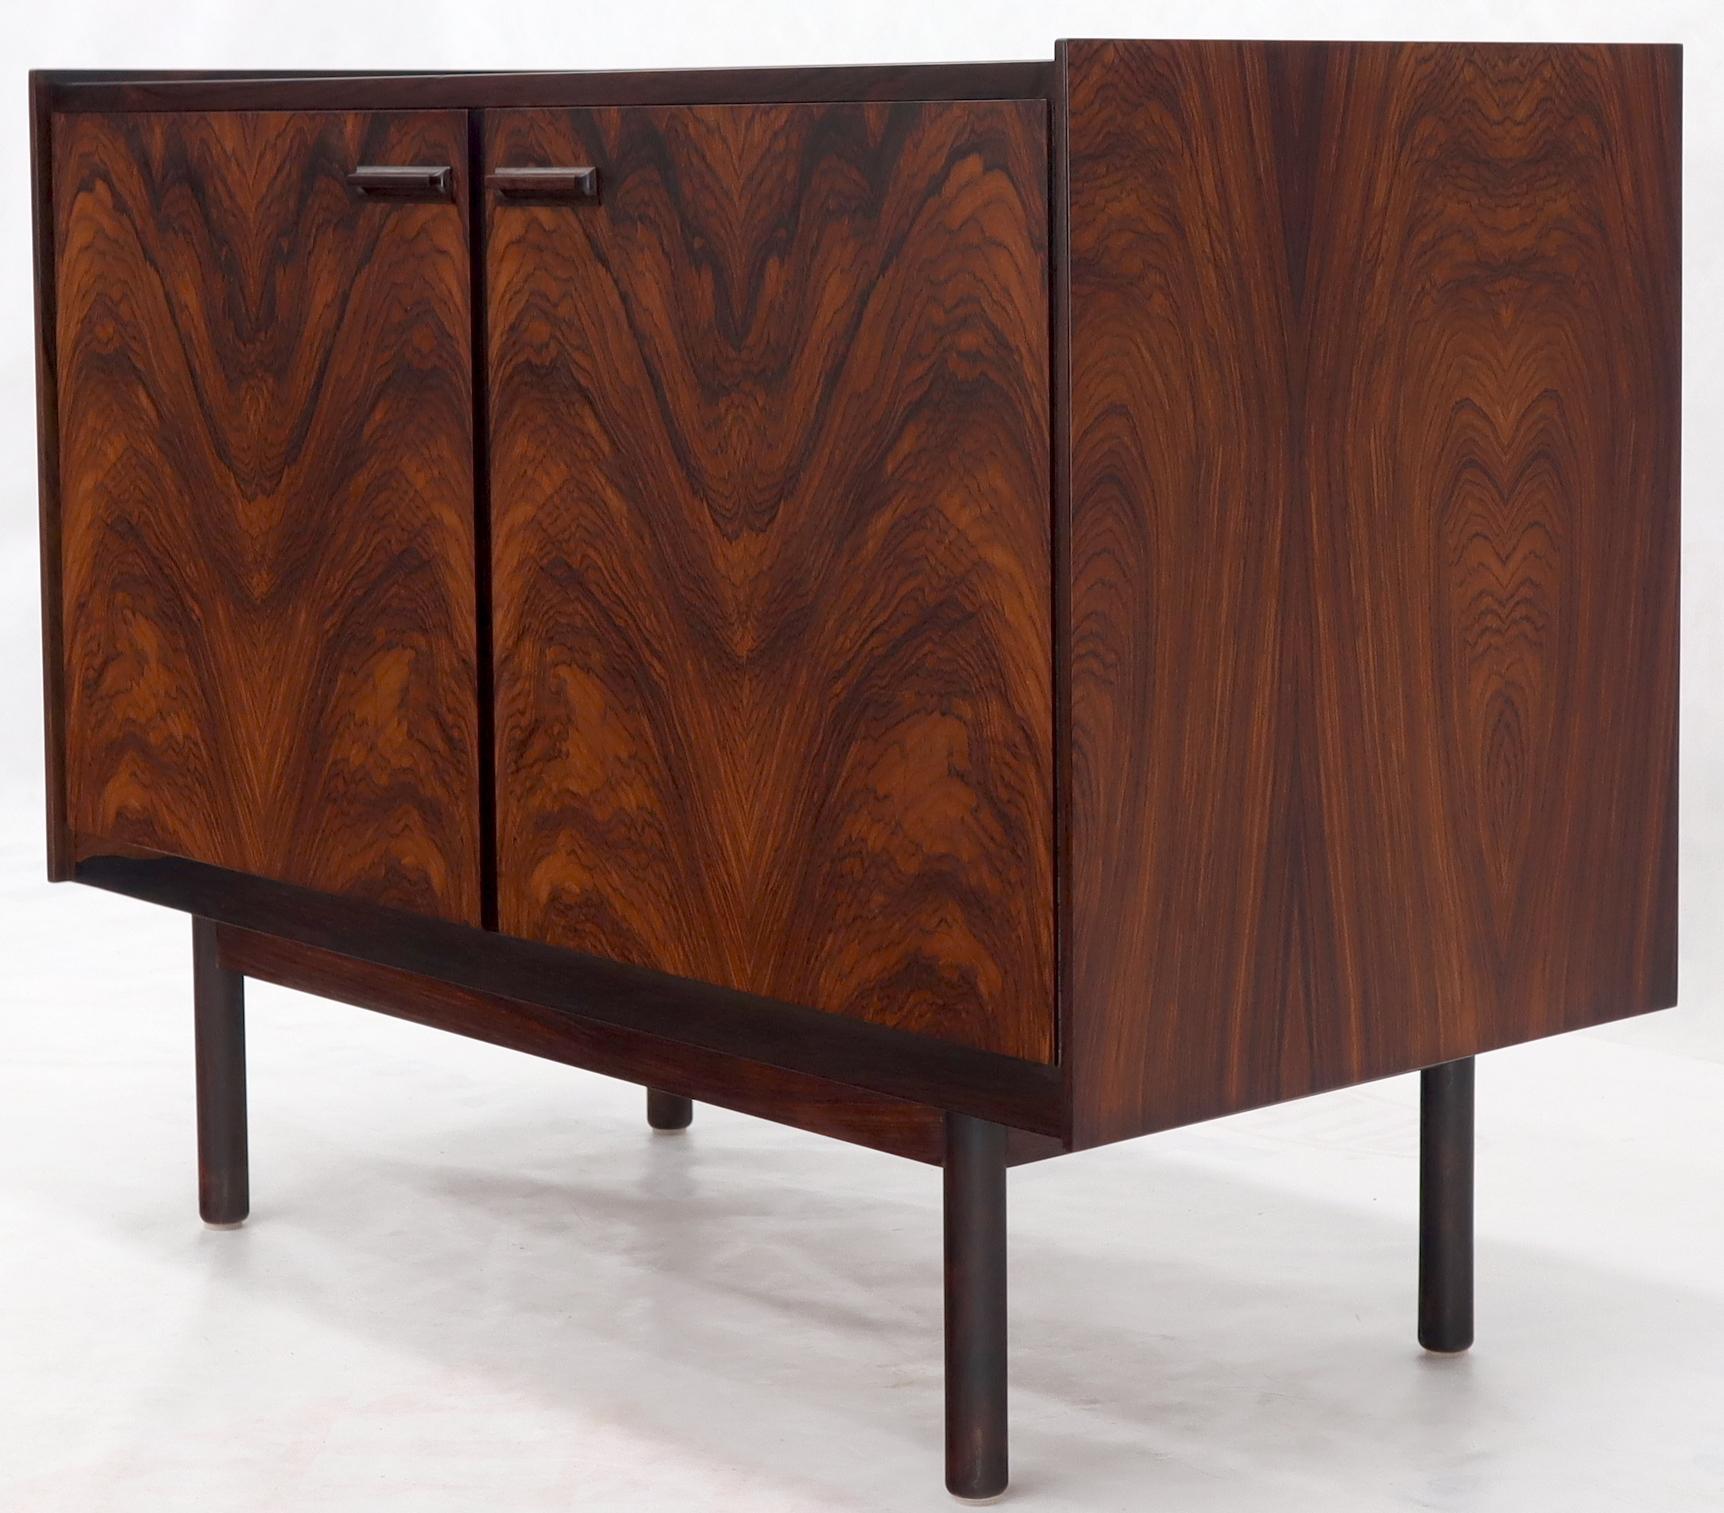 Lacquered Danish Mid-Century Modern Two Part Rosewood Storage Cabinet Credenza For Sale